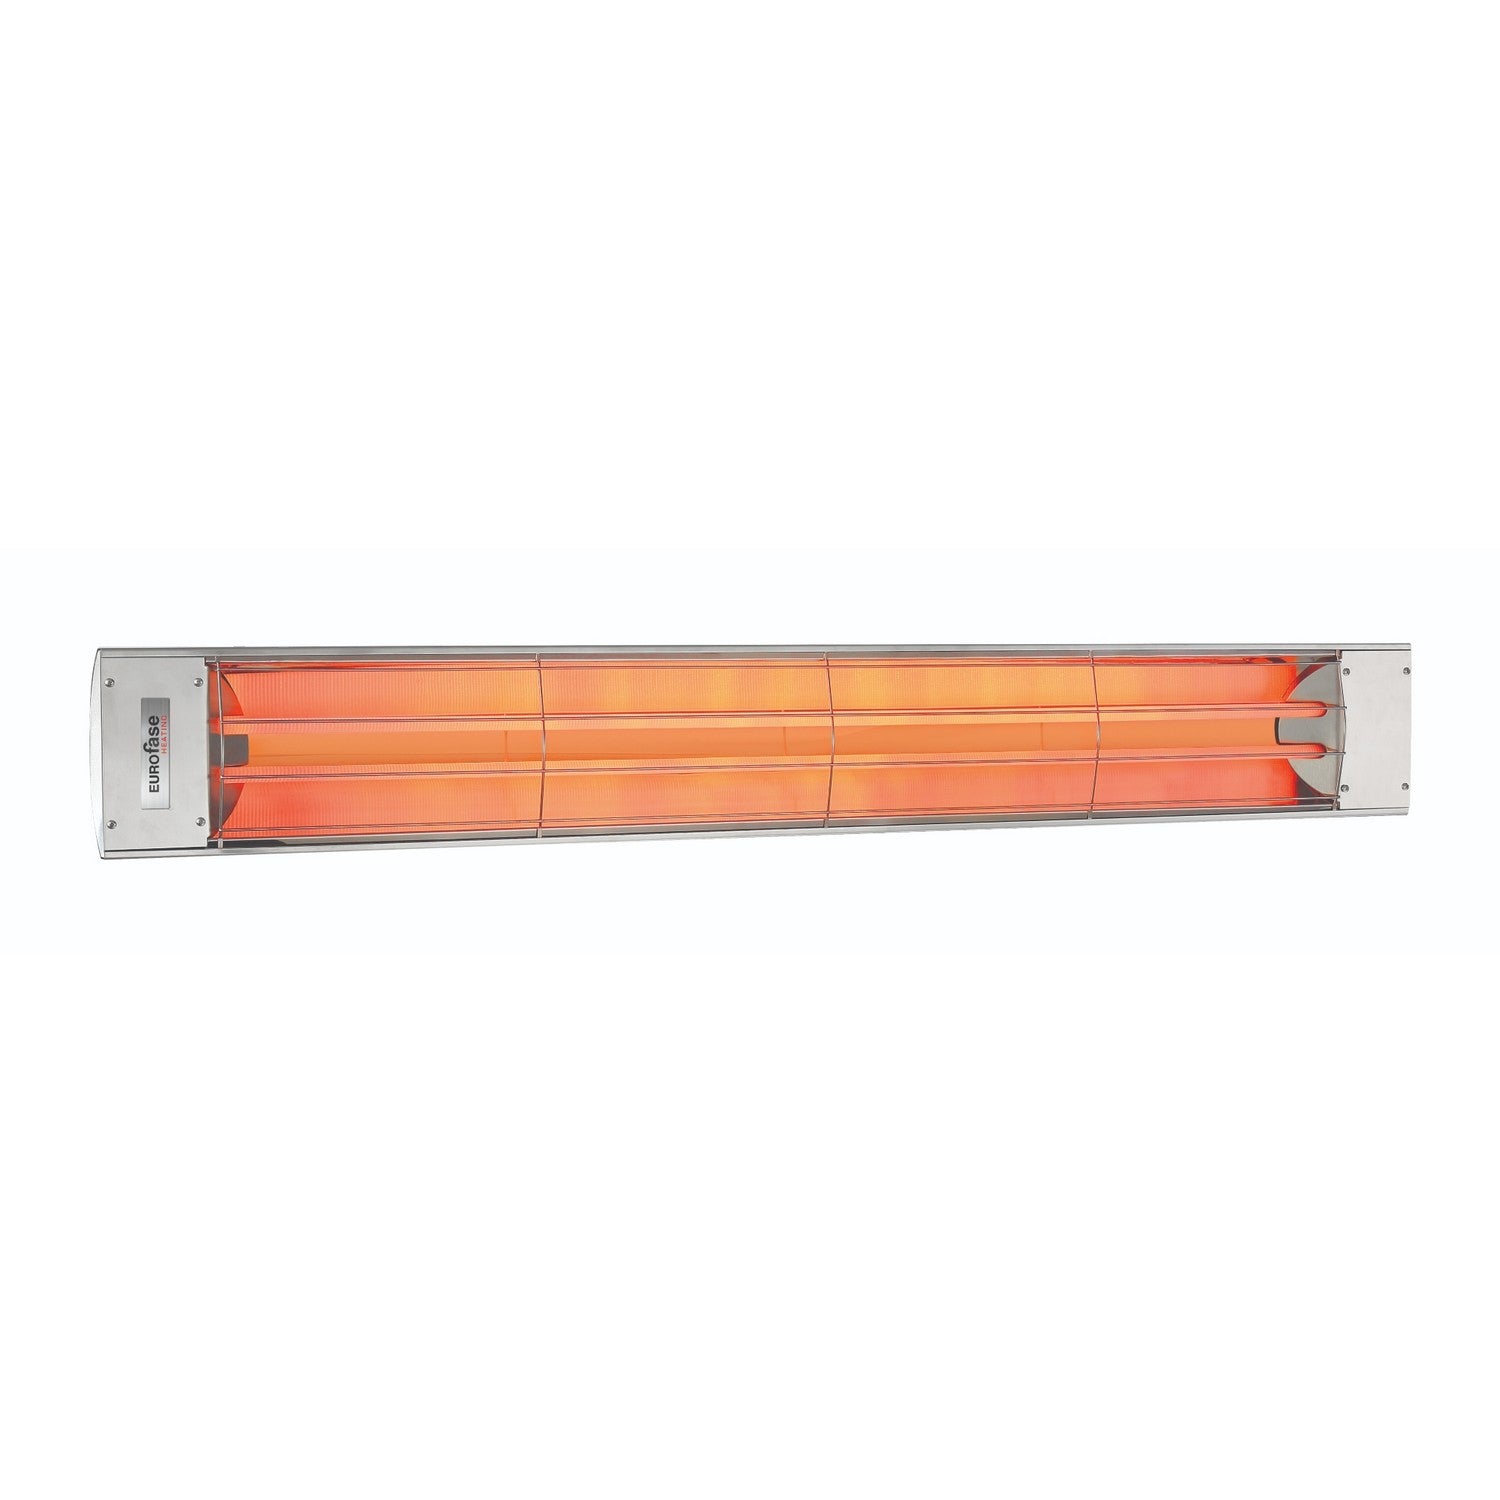 Eurofase - EF60480S - Electric Heater - Stainless Steel